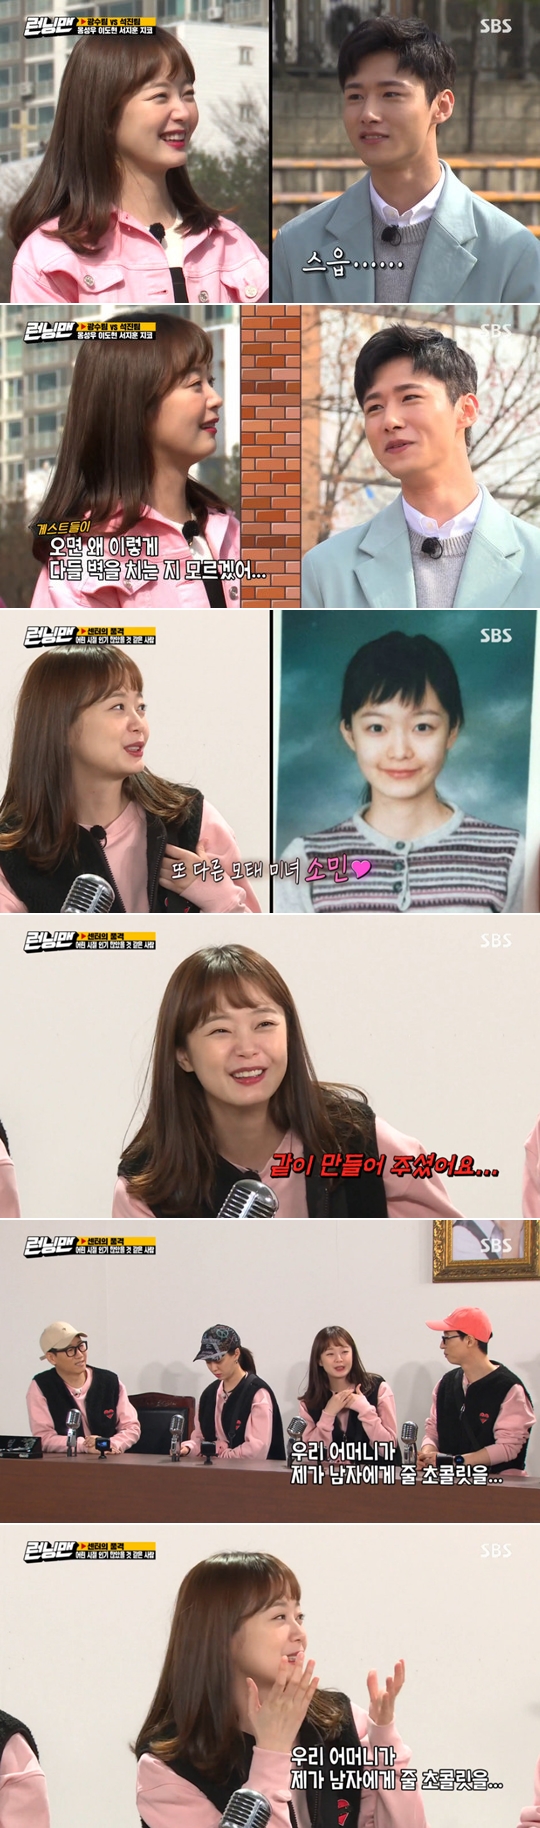 Actor Jeon So-min gave a smile to SBS Running Man viewers with Live adult gag.Running Man, which was broadcast on March 29, was decorated with centre quality.Actor Lee Kwang-soo, comedian Yang Se-chan, formed a visual Lee Kwang-soo team with Actor Lee Do-hyun, Seo Ji-hoon, singer Zico and Ong Sung Woo who appeared as guests on the day.Your Actor is a star who has not had much experience in entertainment.In particular, 24-year-old rookie Actor Seo Ji-hoon made an awkward atmosphere because he could not immediately catch the words of entertainment veterans.MC Yoo Jae-Suk asked Seo Ji-hoon what his recent interest was, and Seo Ji-hoon replied, I like to be a yun-dak.I feel like a minor, Yoo Jae-Suk, Yang Se-chan and others said, while Jeon So-min said, I like it a lot too.So Seo Ji-hoon said nothing but supup. As the unexpected silence continued, Jeon So-min said, Hey! Say something.What am I going to be? he shouted.Lee Kwang-soo advised, Its amazing. Yang Se-chan said, Do something like I have something to do with me.When you come in, I dont know why everyone hits the wall like this, said Jeon So-min.Even during the costume introduction time, the guests did not give a special reaction to Jeon So-min.The members of Running Man mentioned that not all the guests looked at Jeon So-min, and Jeon So-min said, My sister is a little older.I admit it, he said coolly.Even when I was talking about popularity during my school days, Jeon So-min was honest that he was not popular.While the members and guests of Running Man were raving, referring to their extraordinary school days in succession, Jeon So-min said that unlike Lee Do-hyun, who used her mother to take home the chocolates she received from girls, she made chocolate for a man with her mother.I made chocolate for a man at home with my mother; usually my favorite boys liked my best friend, recalled Jeon So-min.Yoo Jae-Suk expressed sympathy that I did it, the atmosphere is so good, and the friends around me are always connected.hwang hye-jin